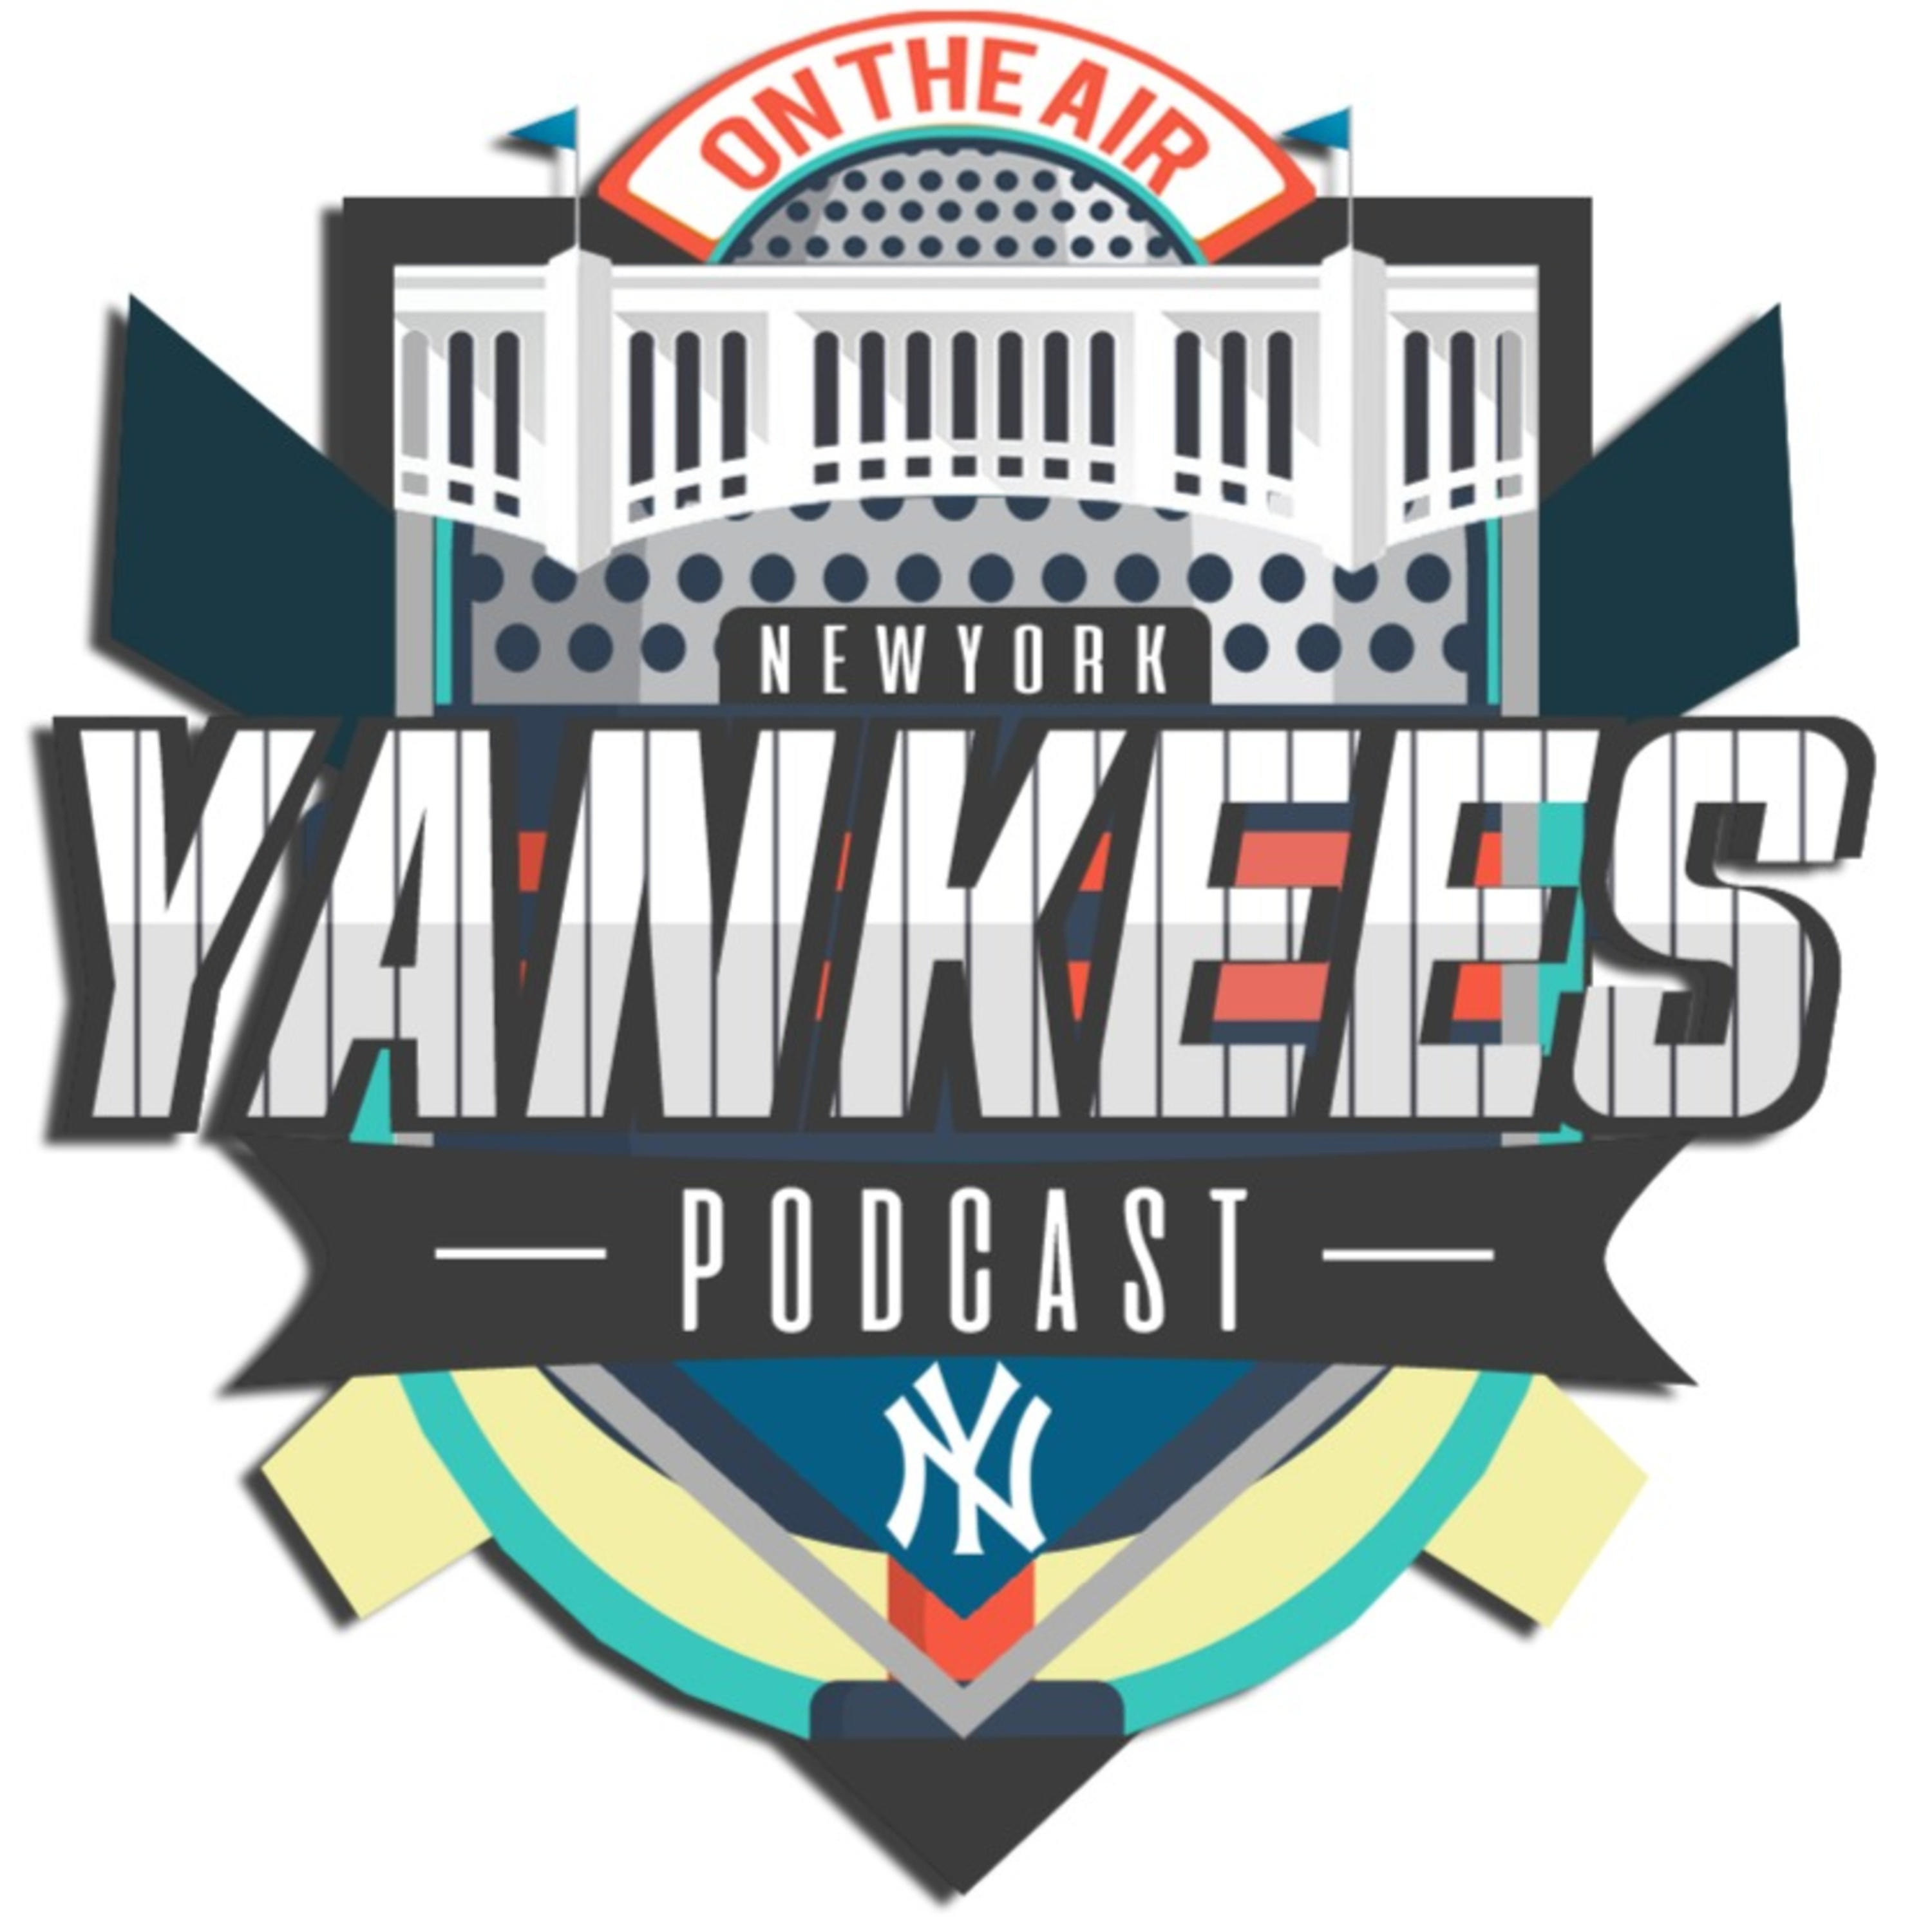 New York Yankees Hungary Podcast - DS! x Mike - Episode 1